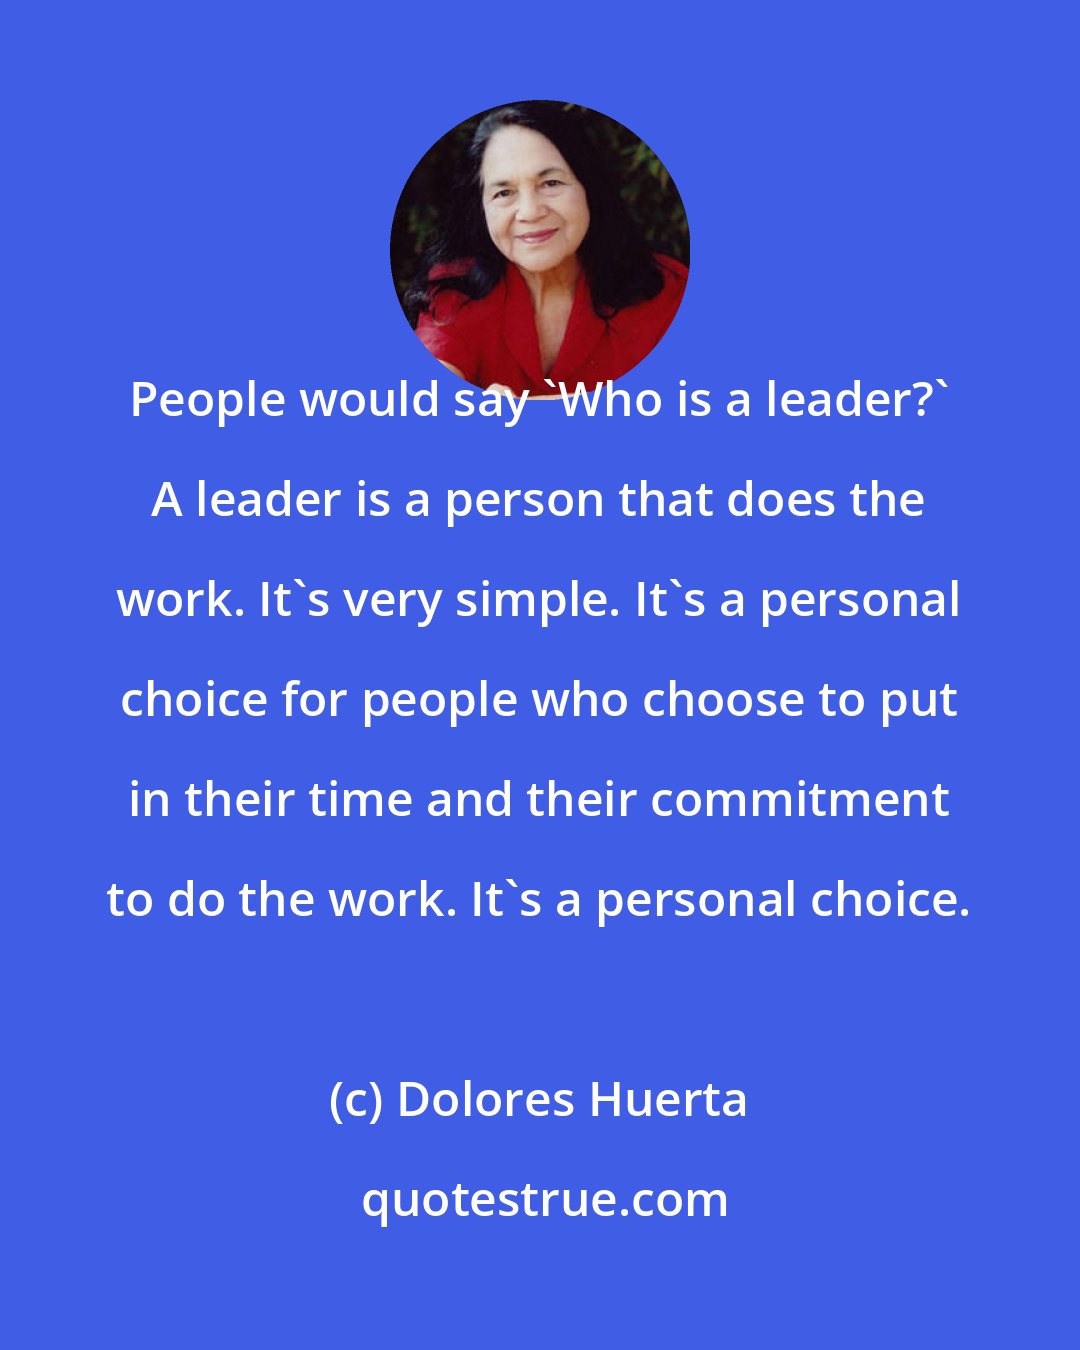 Dolores Huerta: People would say 'Who is a leader?' A leader is a person that does the work. It's very simple. It's a personal choice for people who choose to put in their time and their commitment to do the work. It's a personal choice.